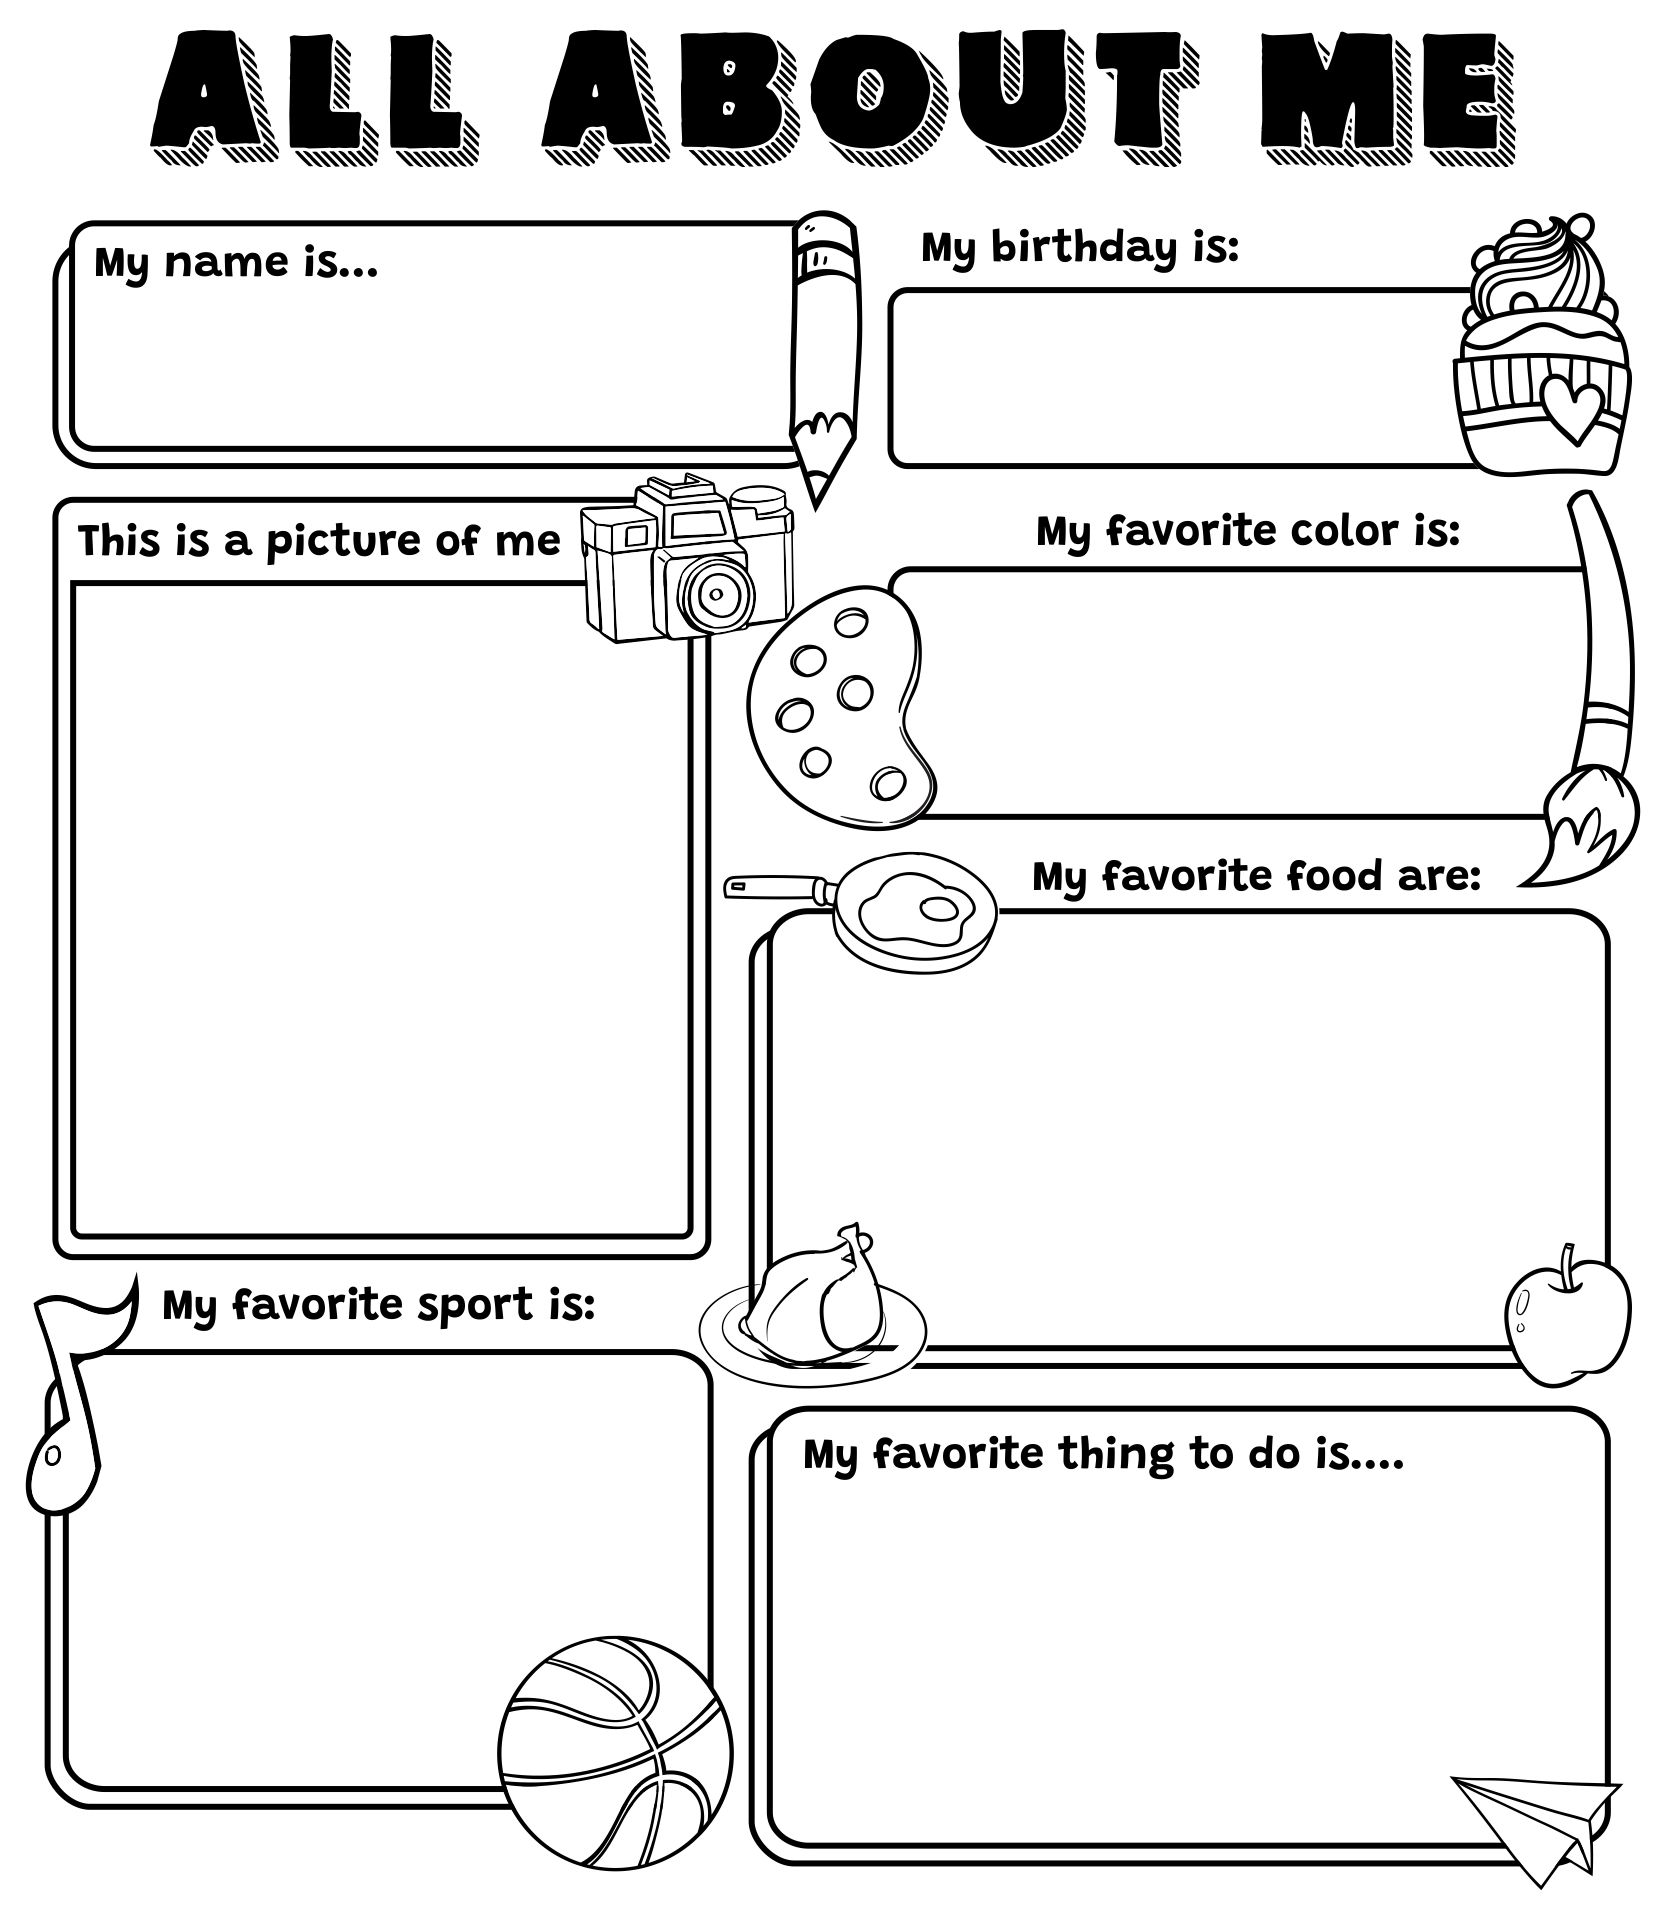 All About Me Worksheet Pdf